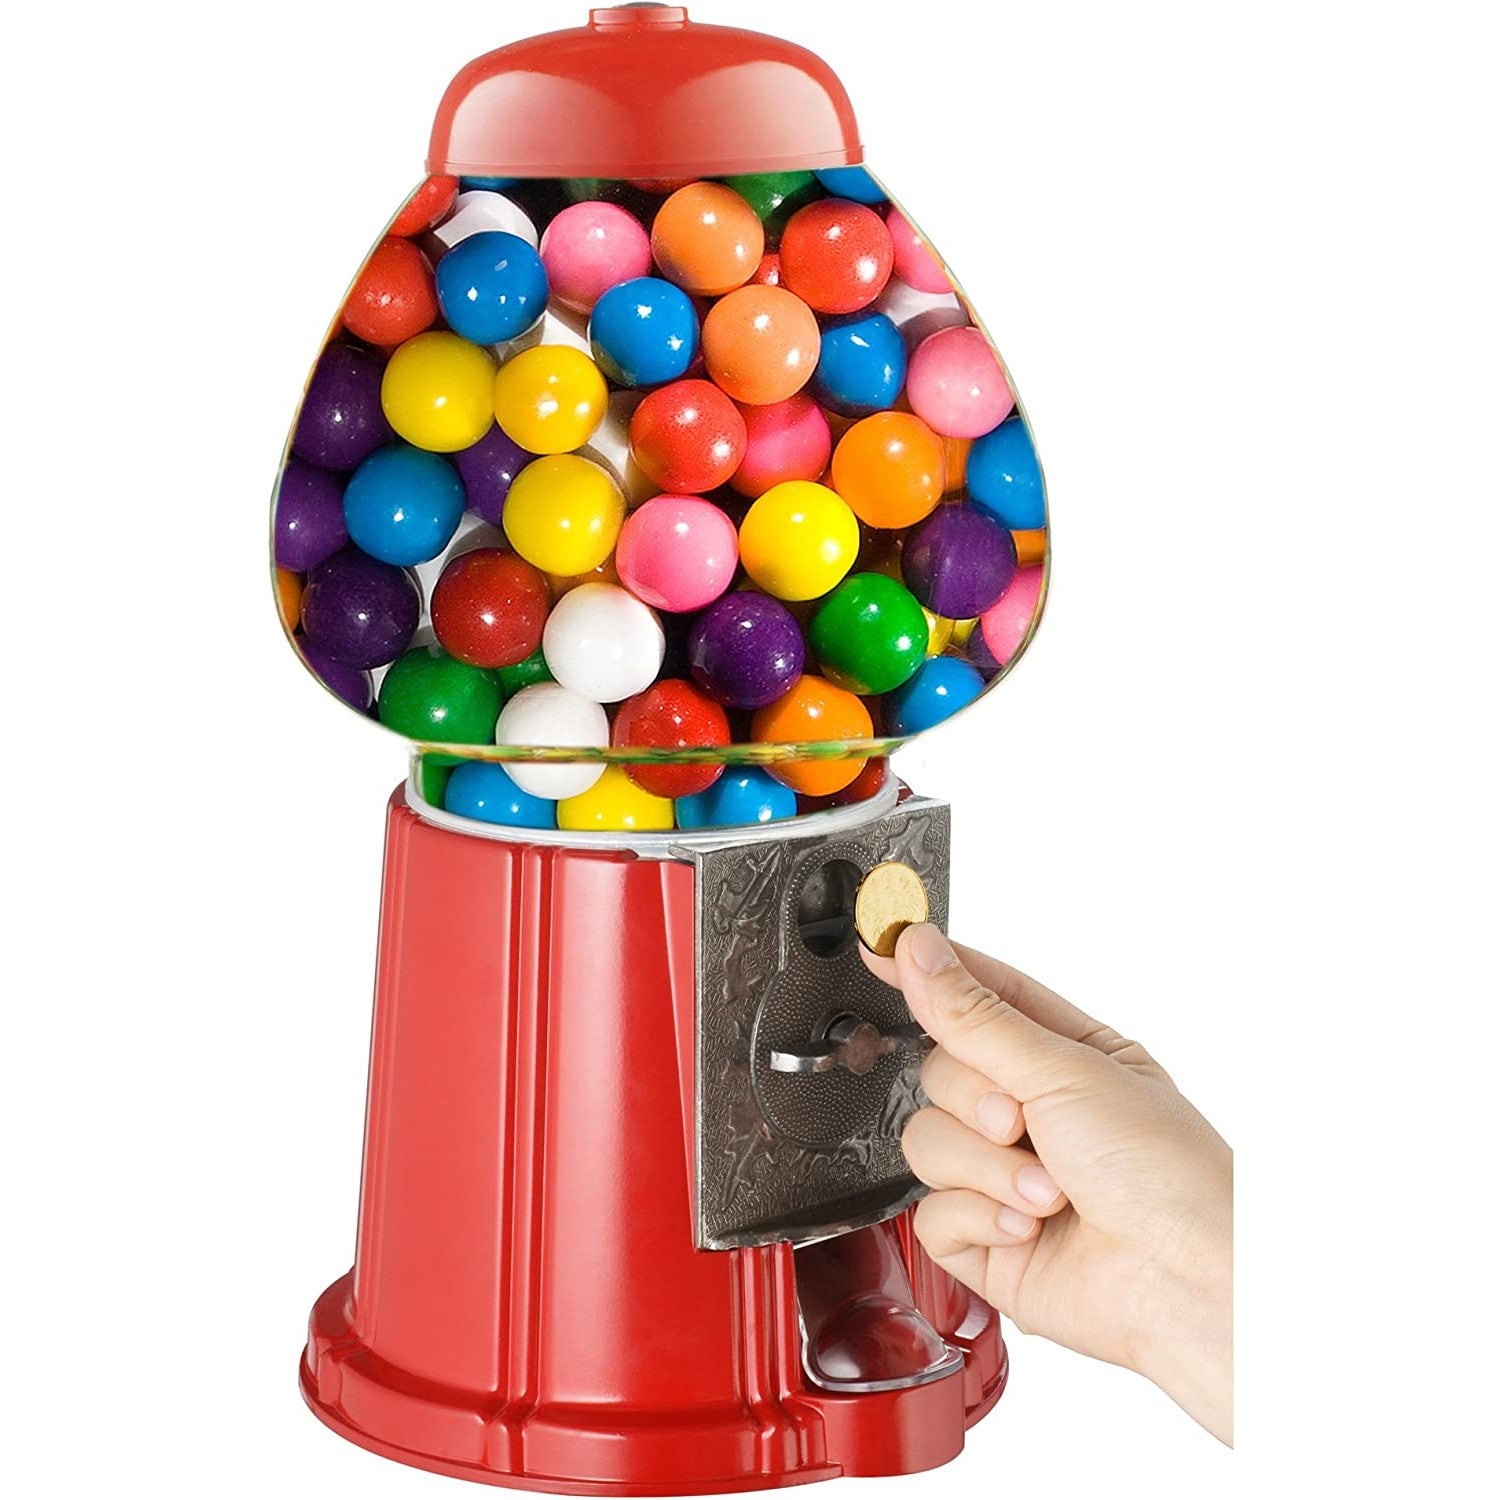 A side view of a retro gumball dispenser filled with colorful gumballs. A hand is holding a coin near the coin slot.